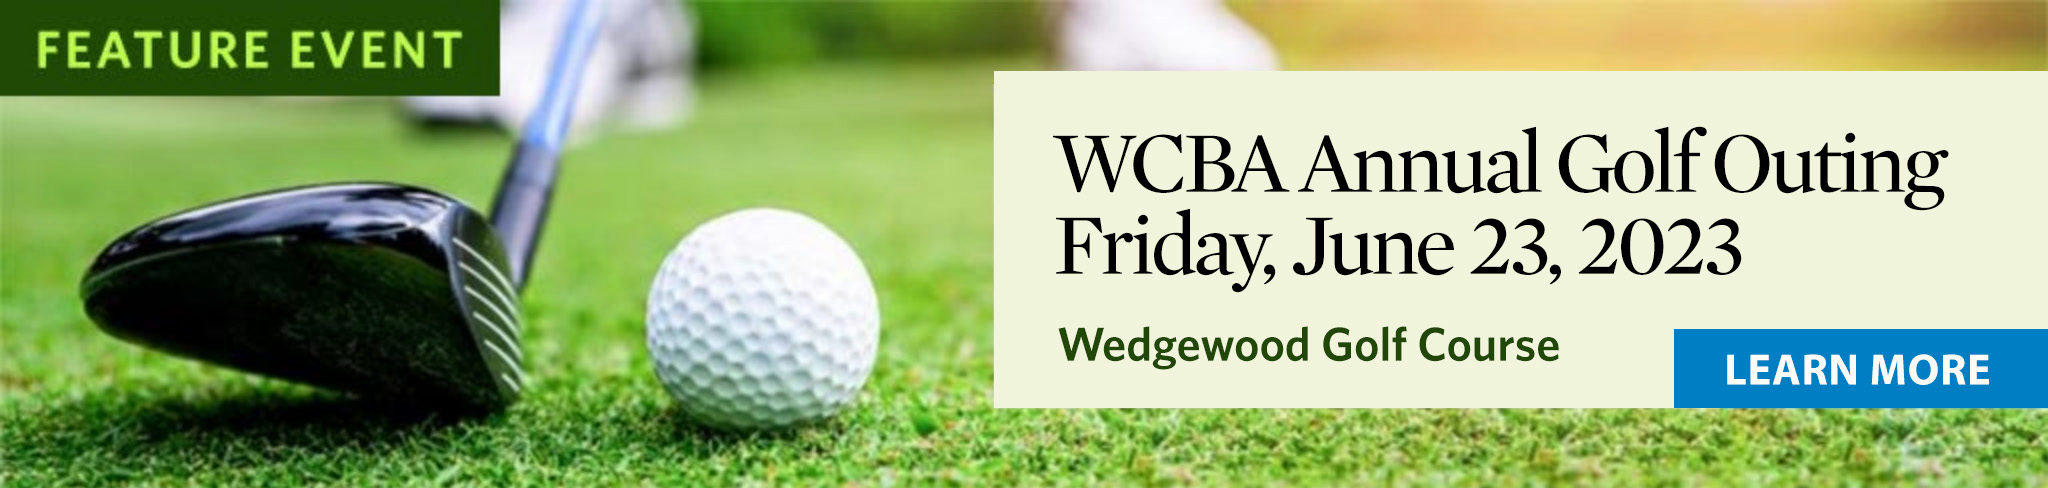 Golf club putter with ball and text WCBA annual golf outing Friday, June 23, 2023 at Wedgewood Golf Course